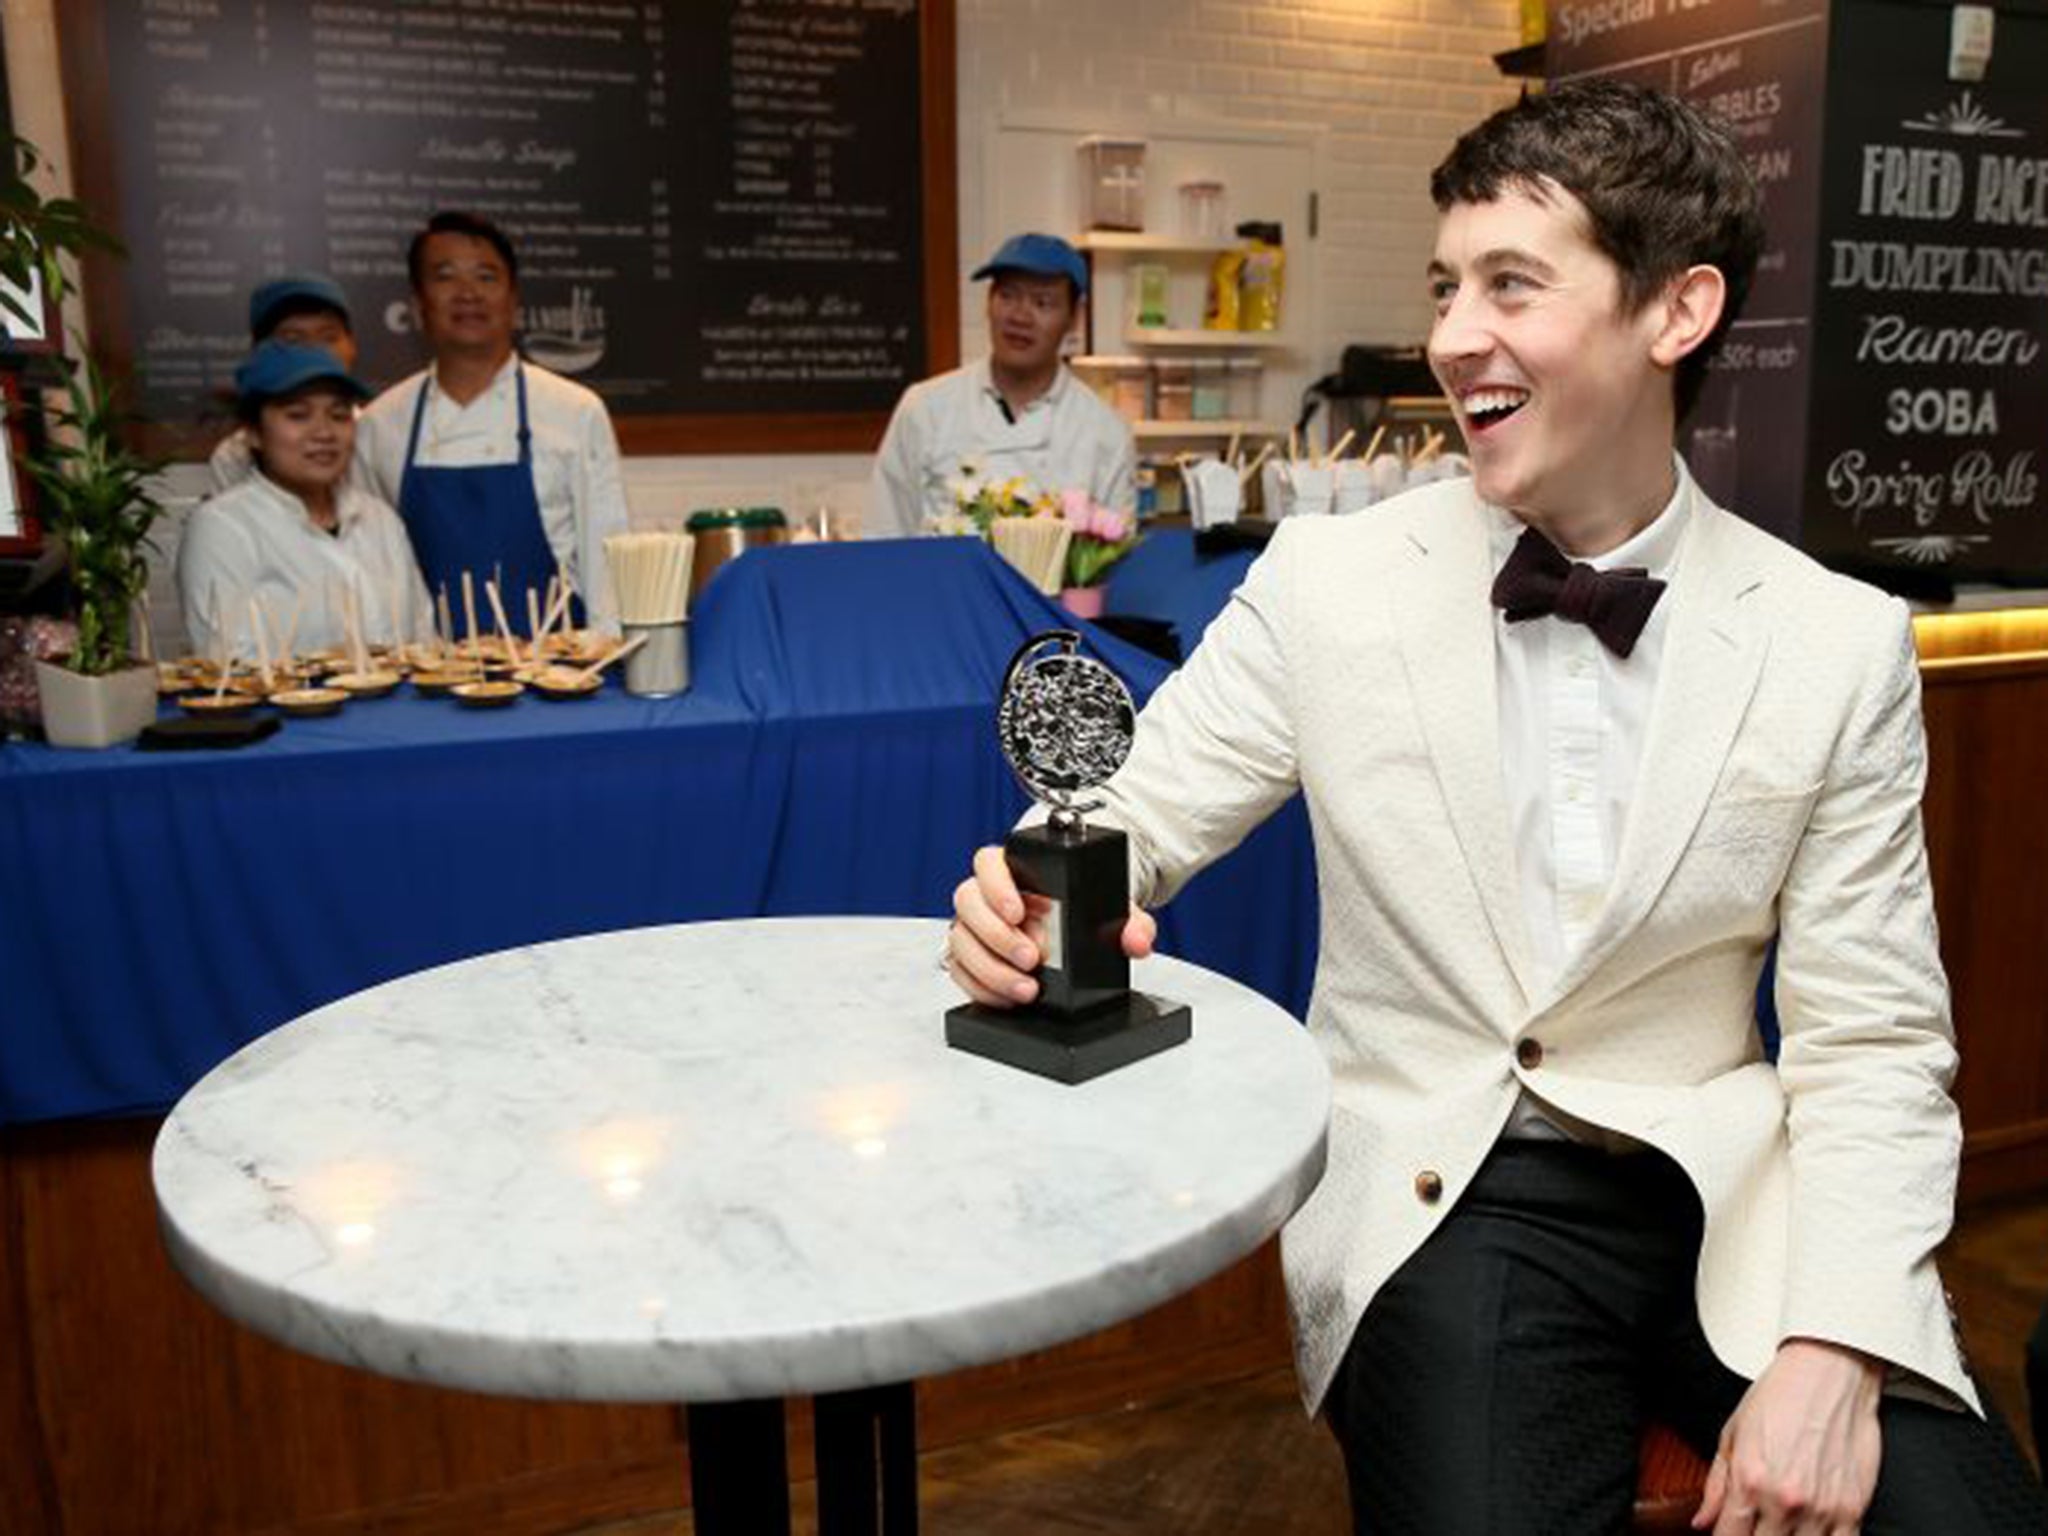 Alex Sharp, who used to make coffee tables when he was a struggling actor, celebrates in New York